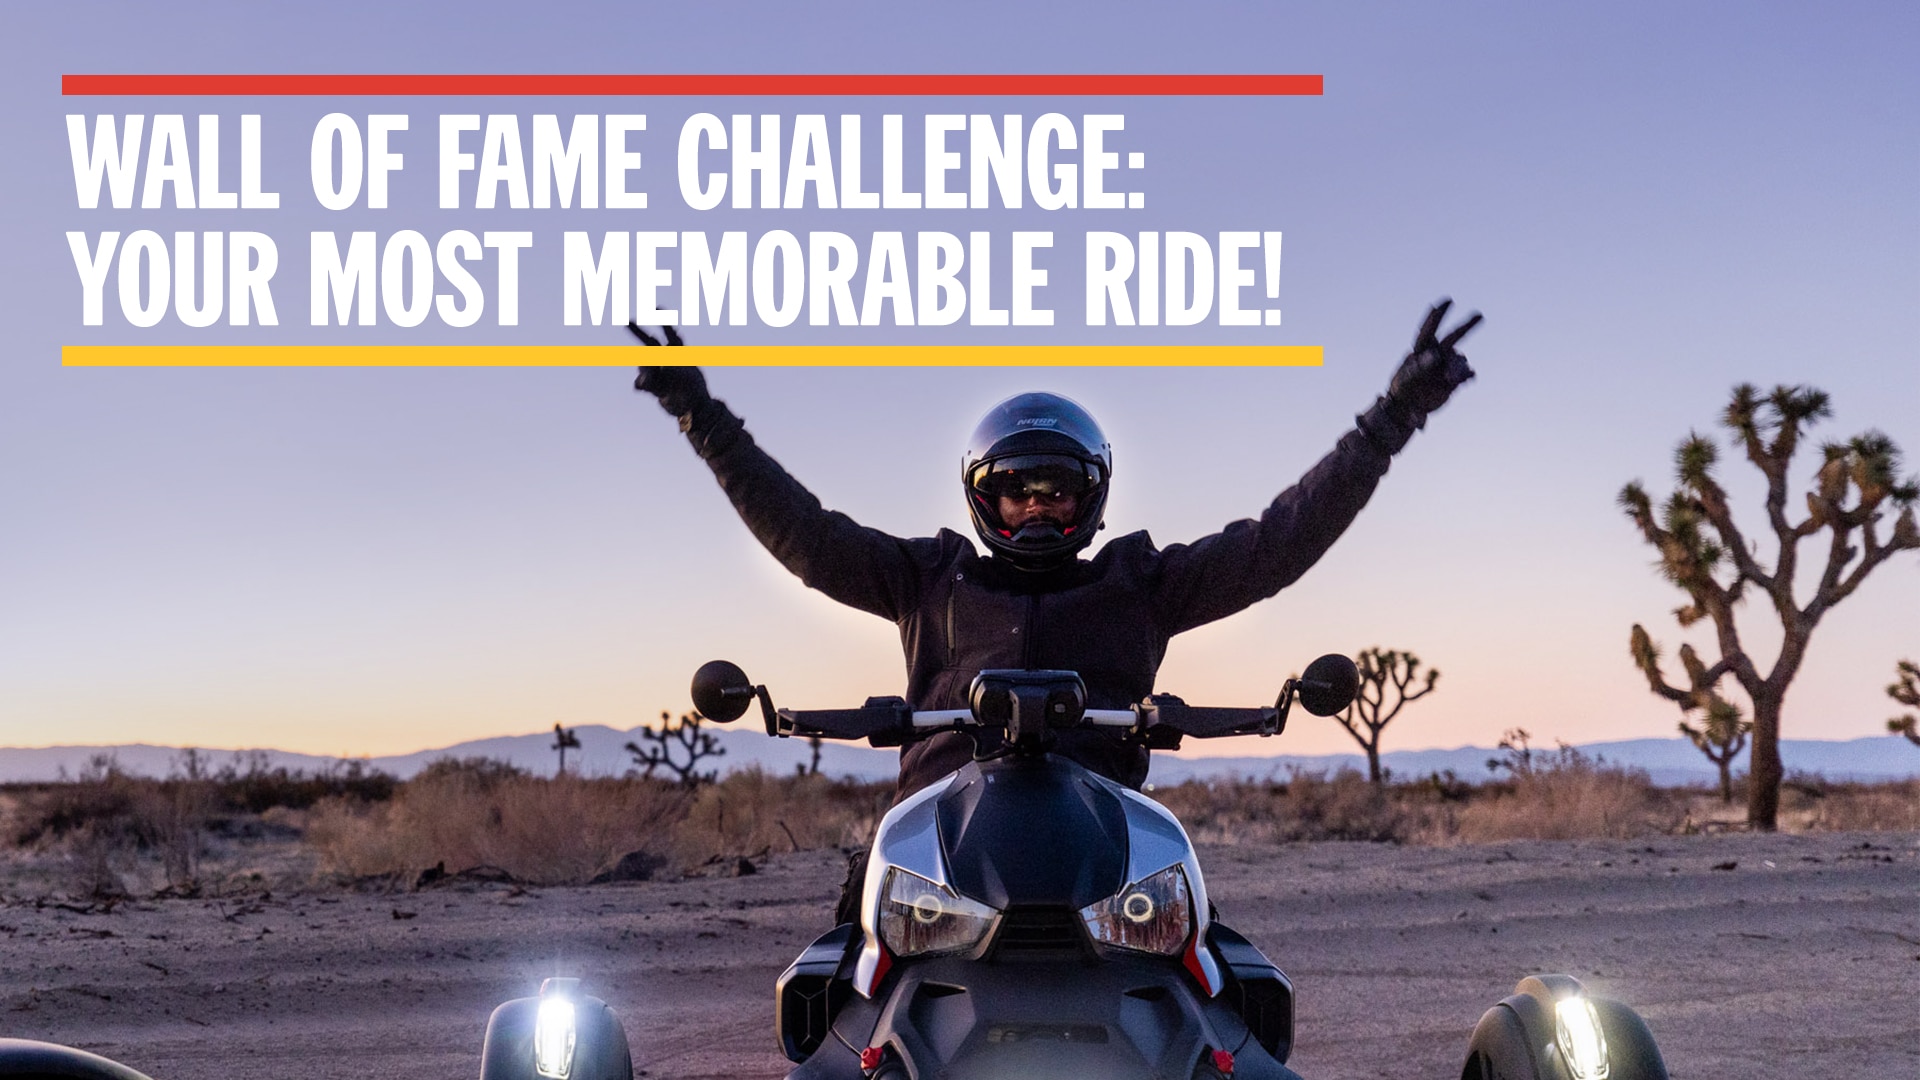 Wall of Fame Challenge: Your most memorable ride